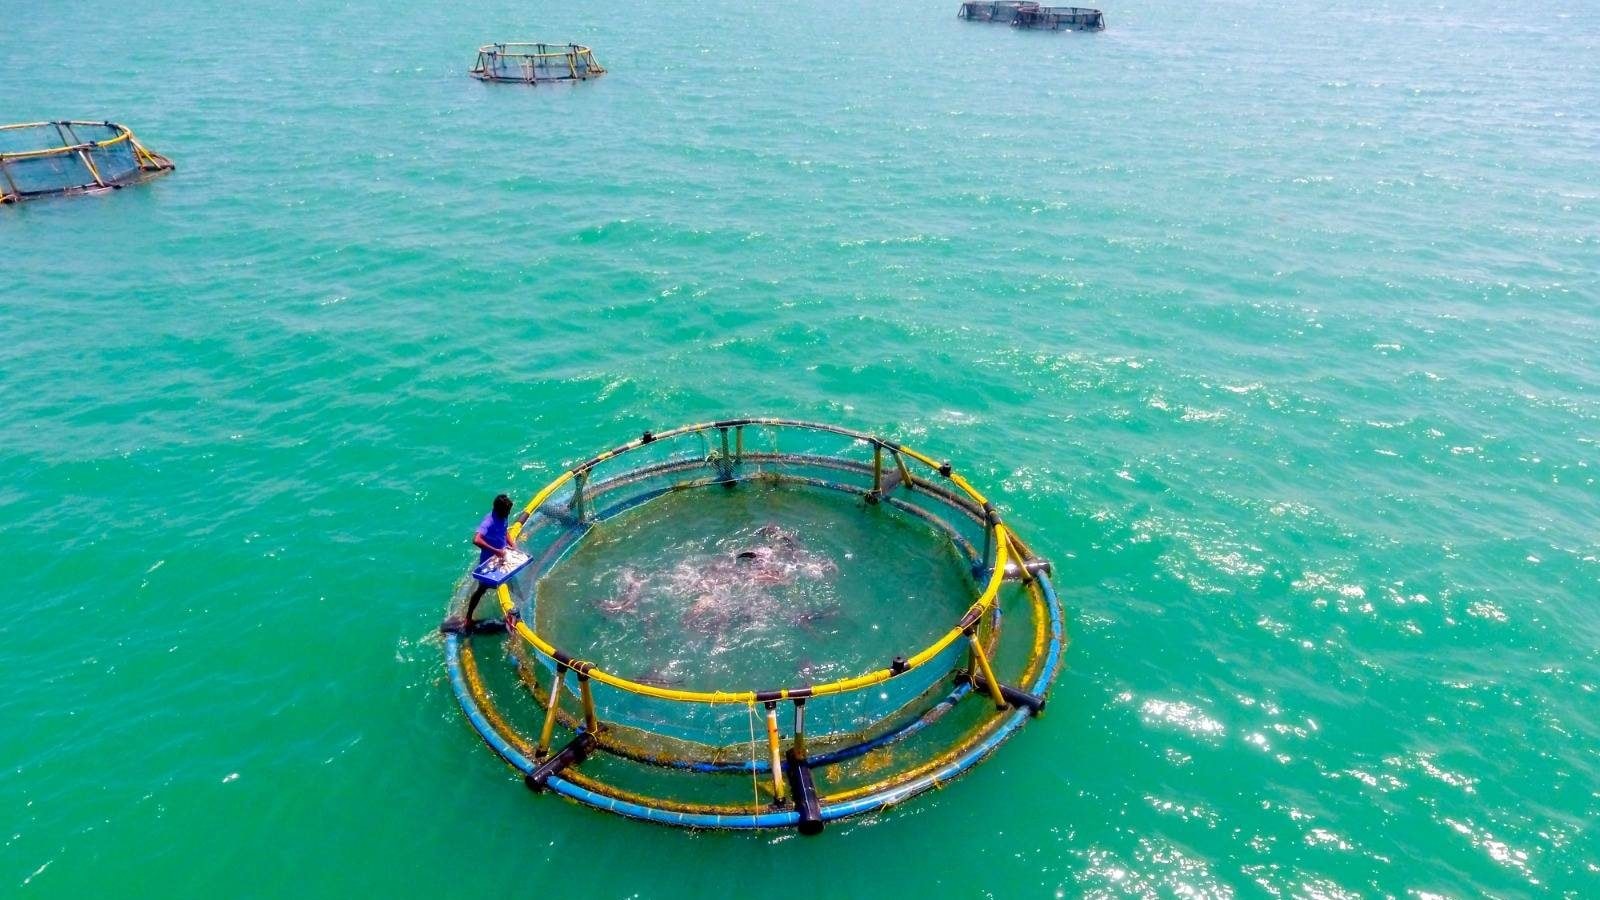 Aquaculture in 146 places within 10 km from the sea coast;  The target is to produce 21.3 lakh tonnes per annum